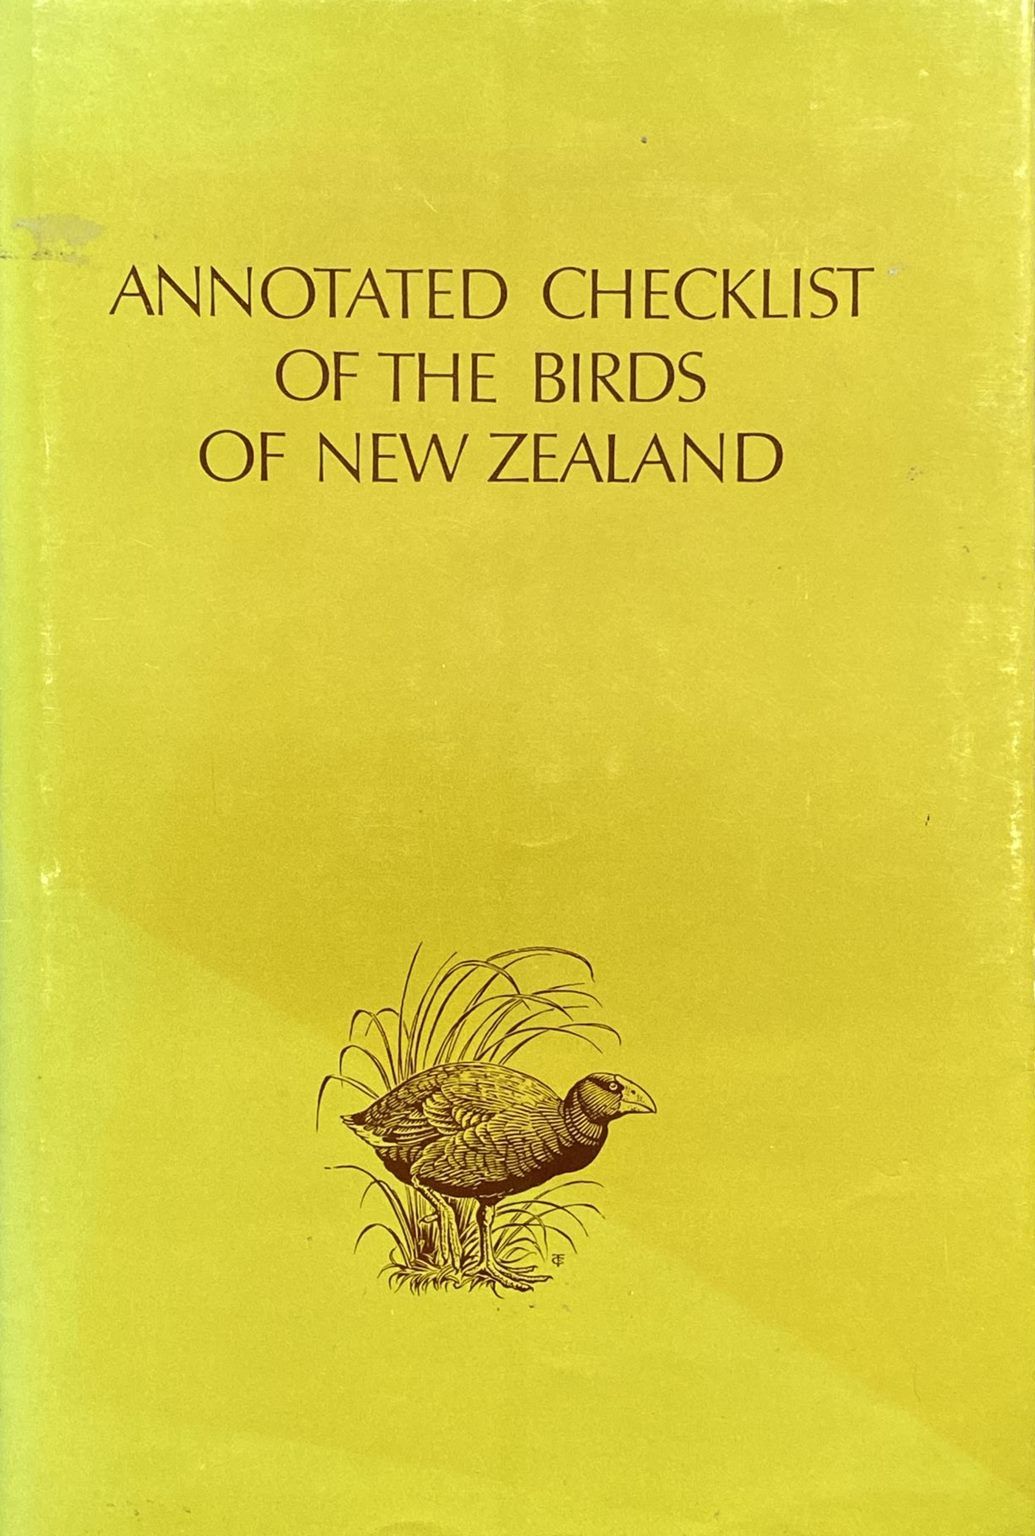 ANNOTATED CHECKLIST OF THE BIRDS OF NEW ZEALAND